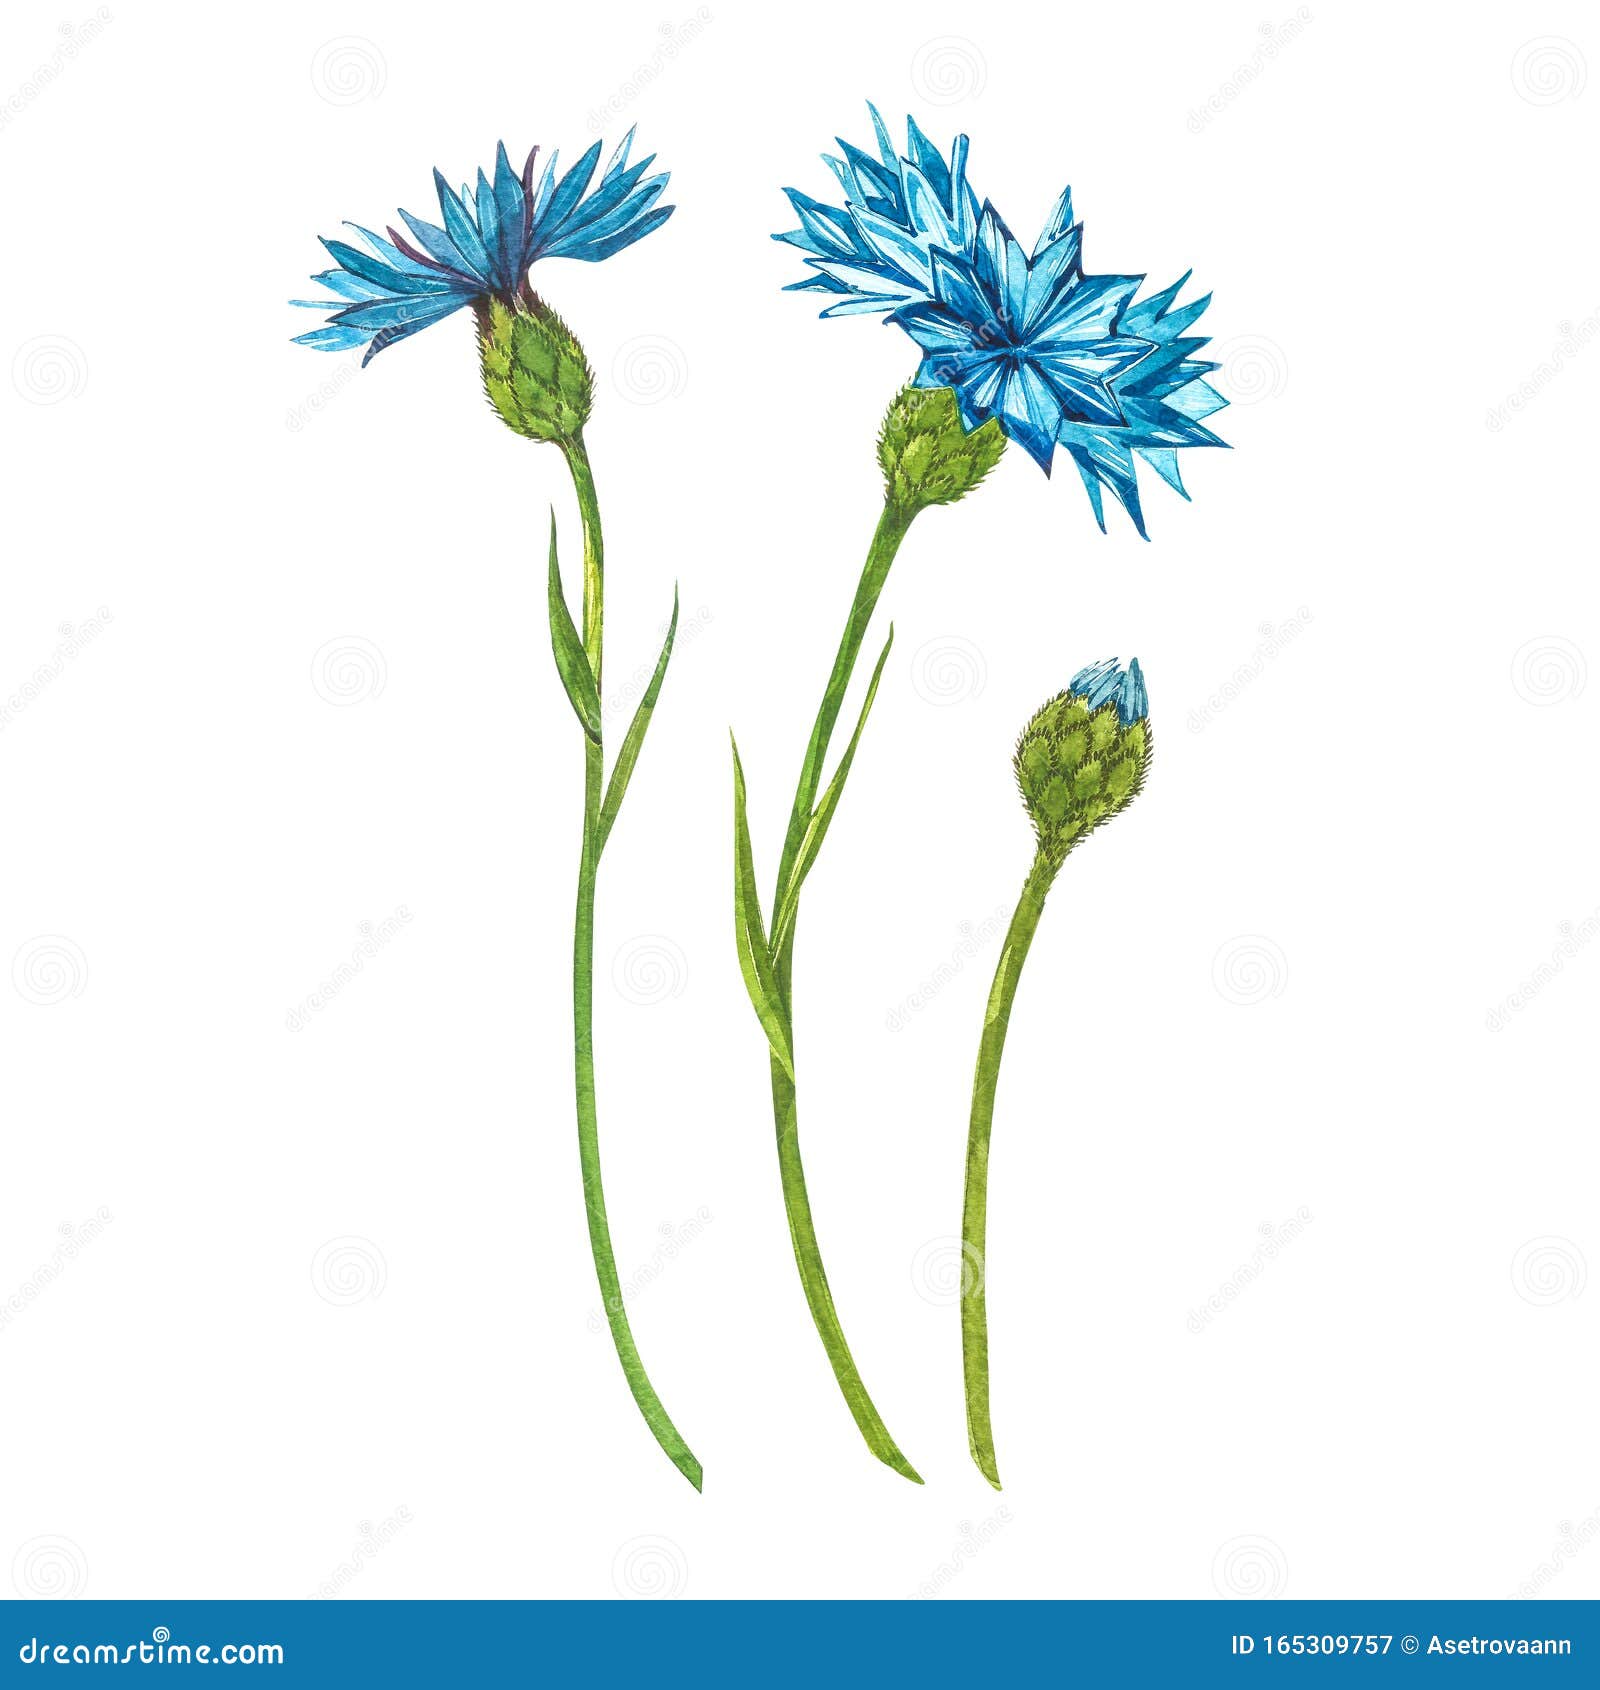 blue cornflower herb bachelor button flower bouquet isolated white background set drawing cornflowers floral elements 165309757